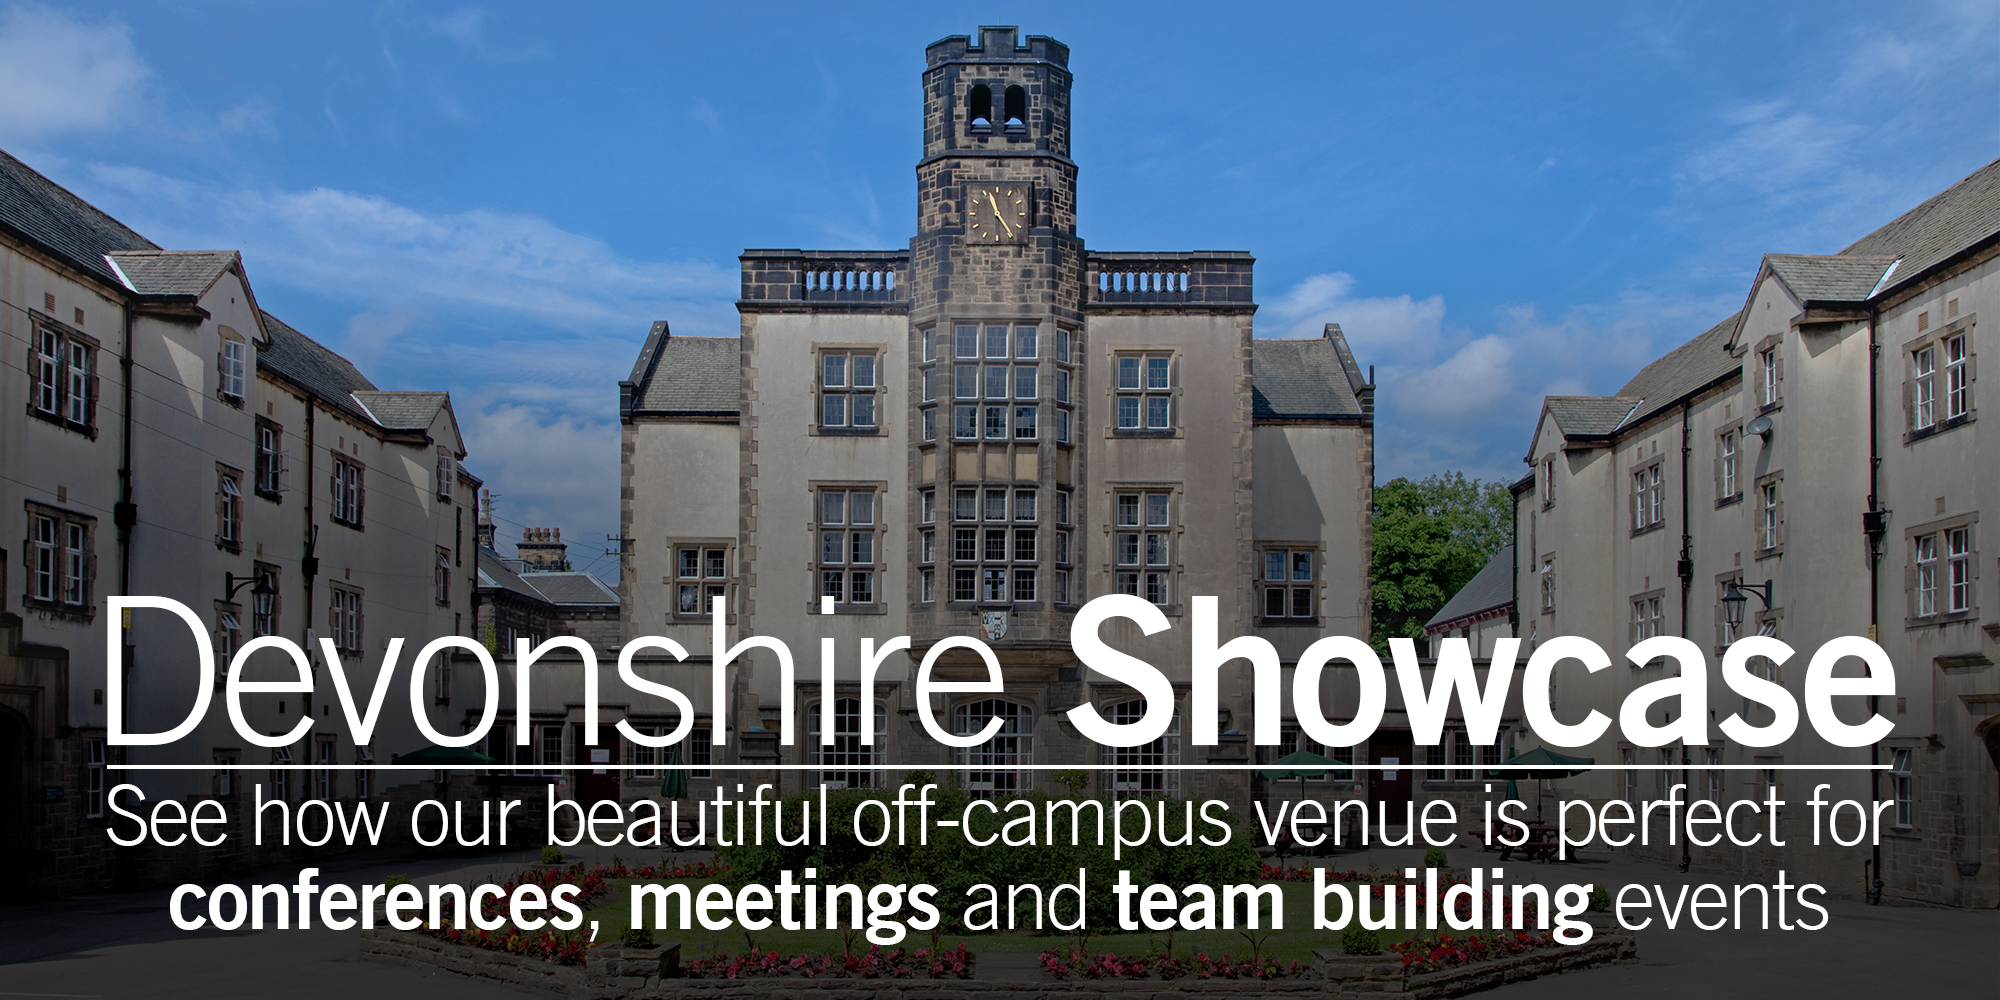 Devonshire Showcase - See how our beautiful off-campus venue is perfect for conferences, meetings, and team building events